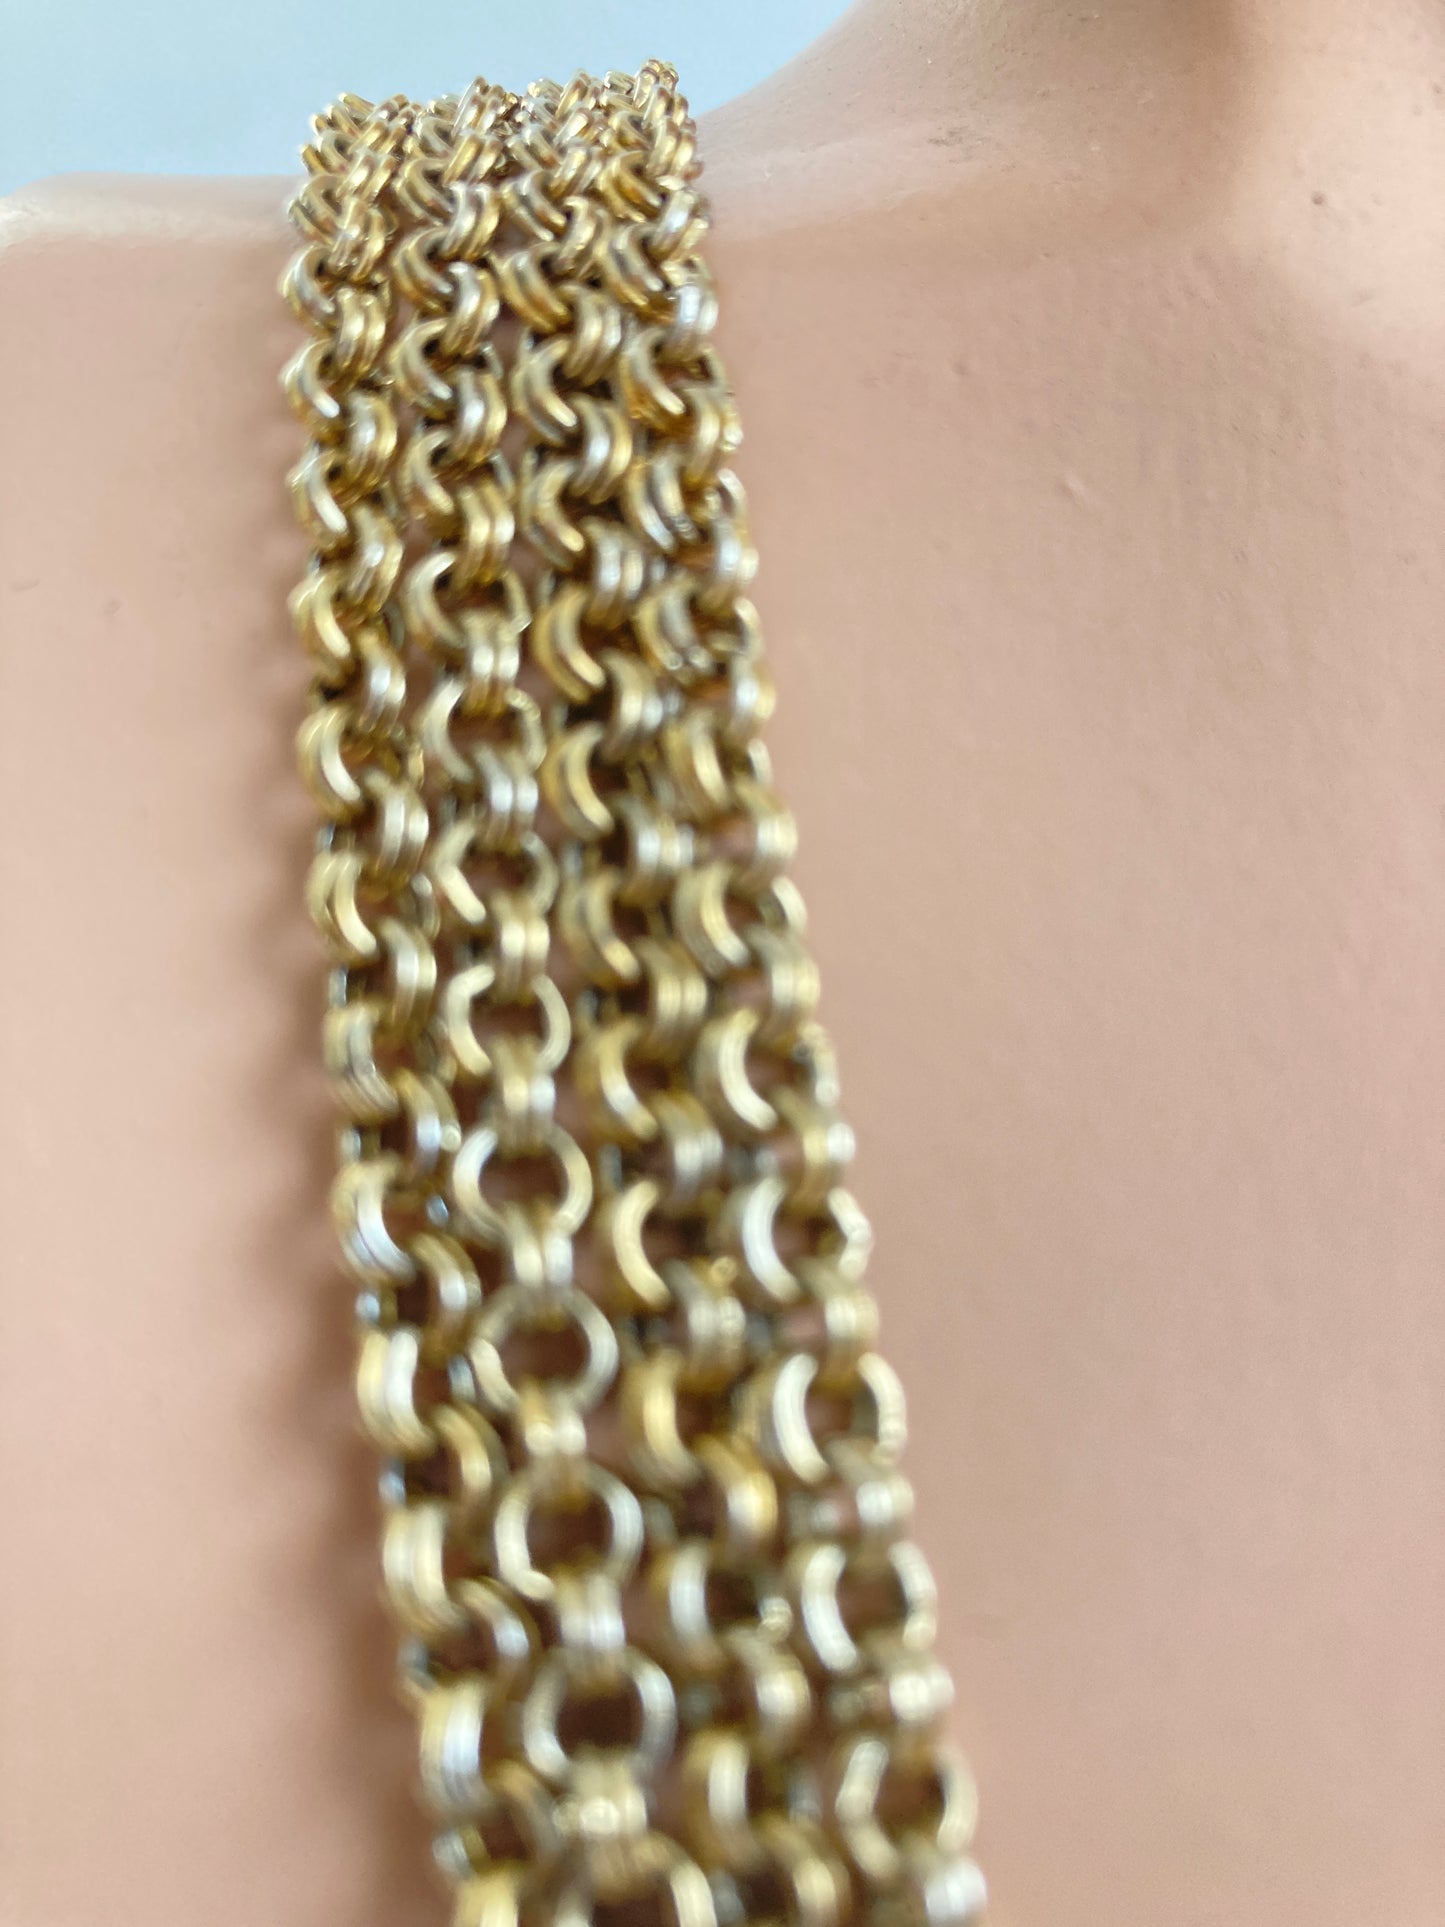 Super Long Double Link Chain Necklace 87 inches